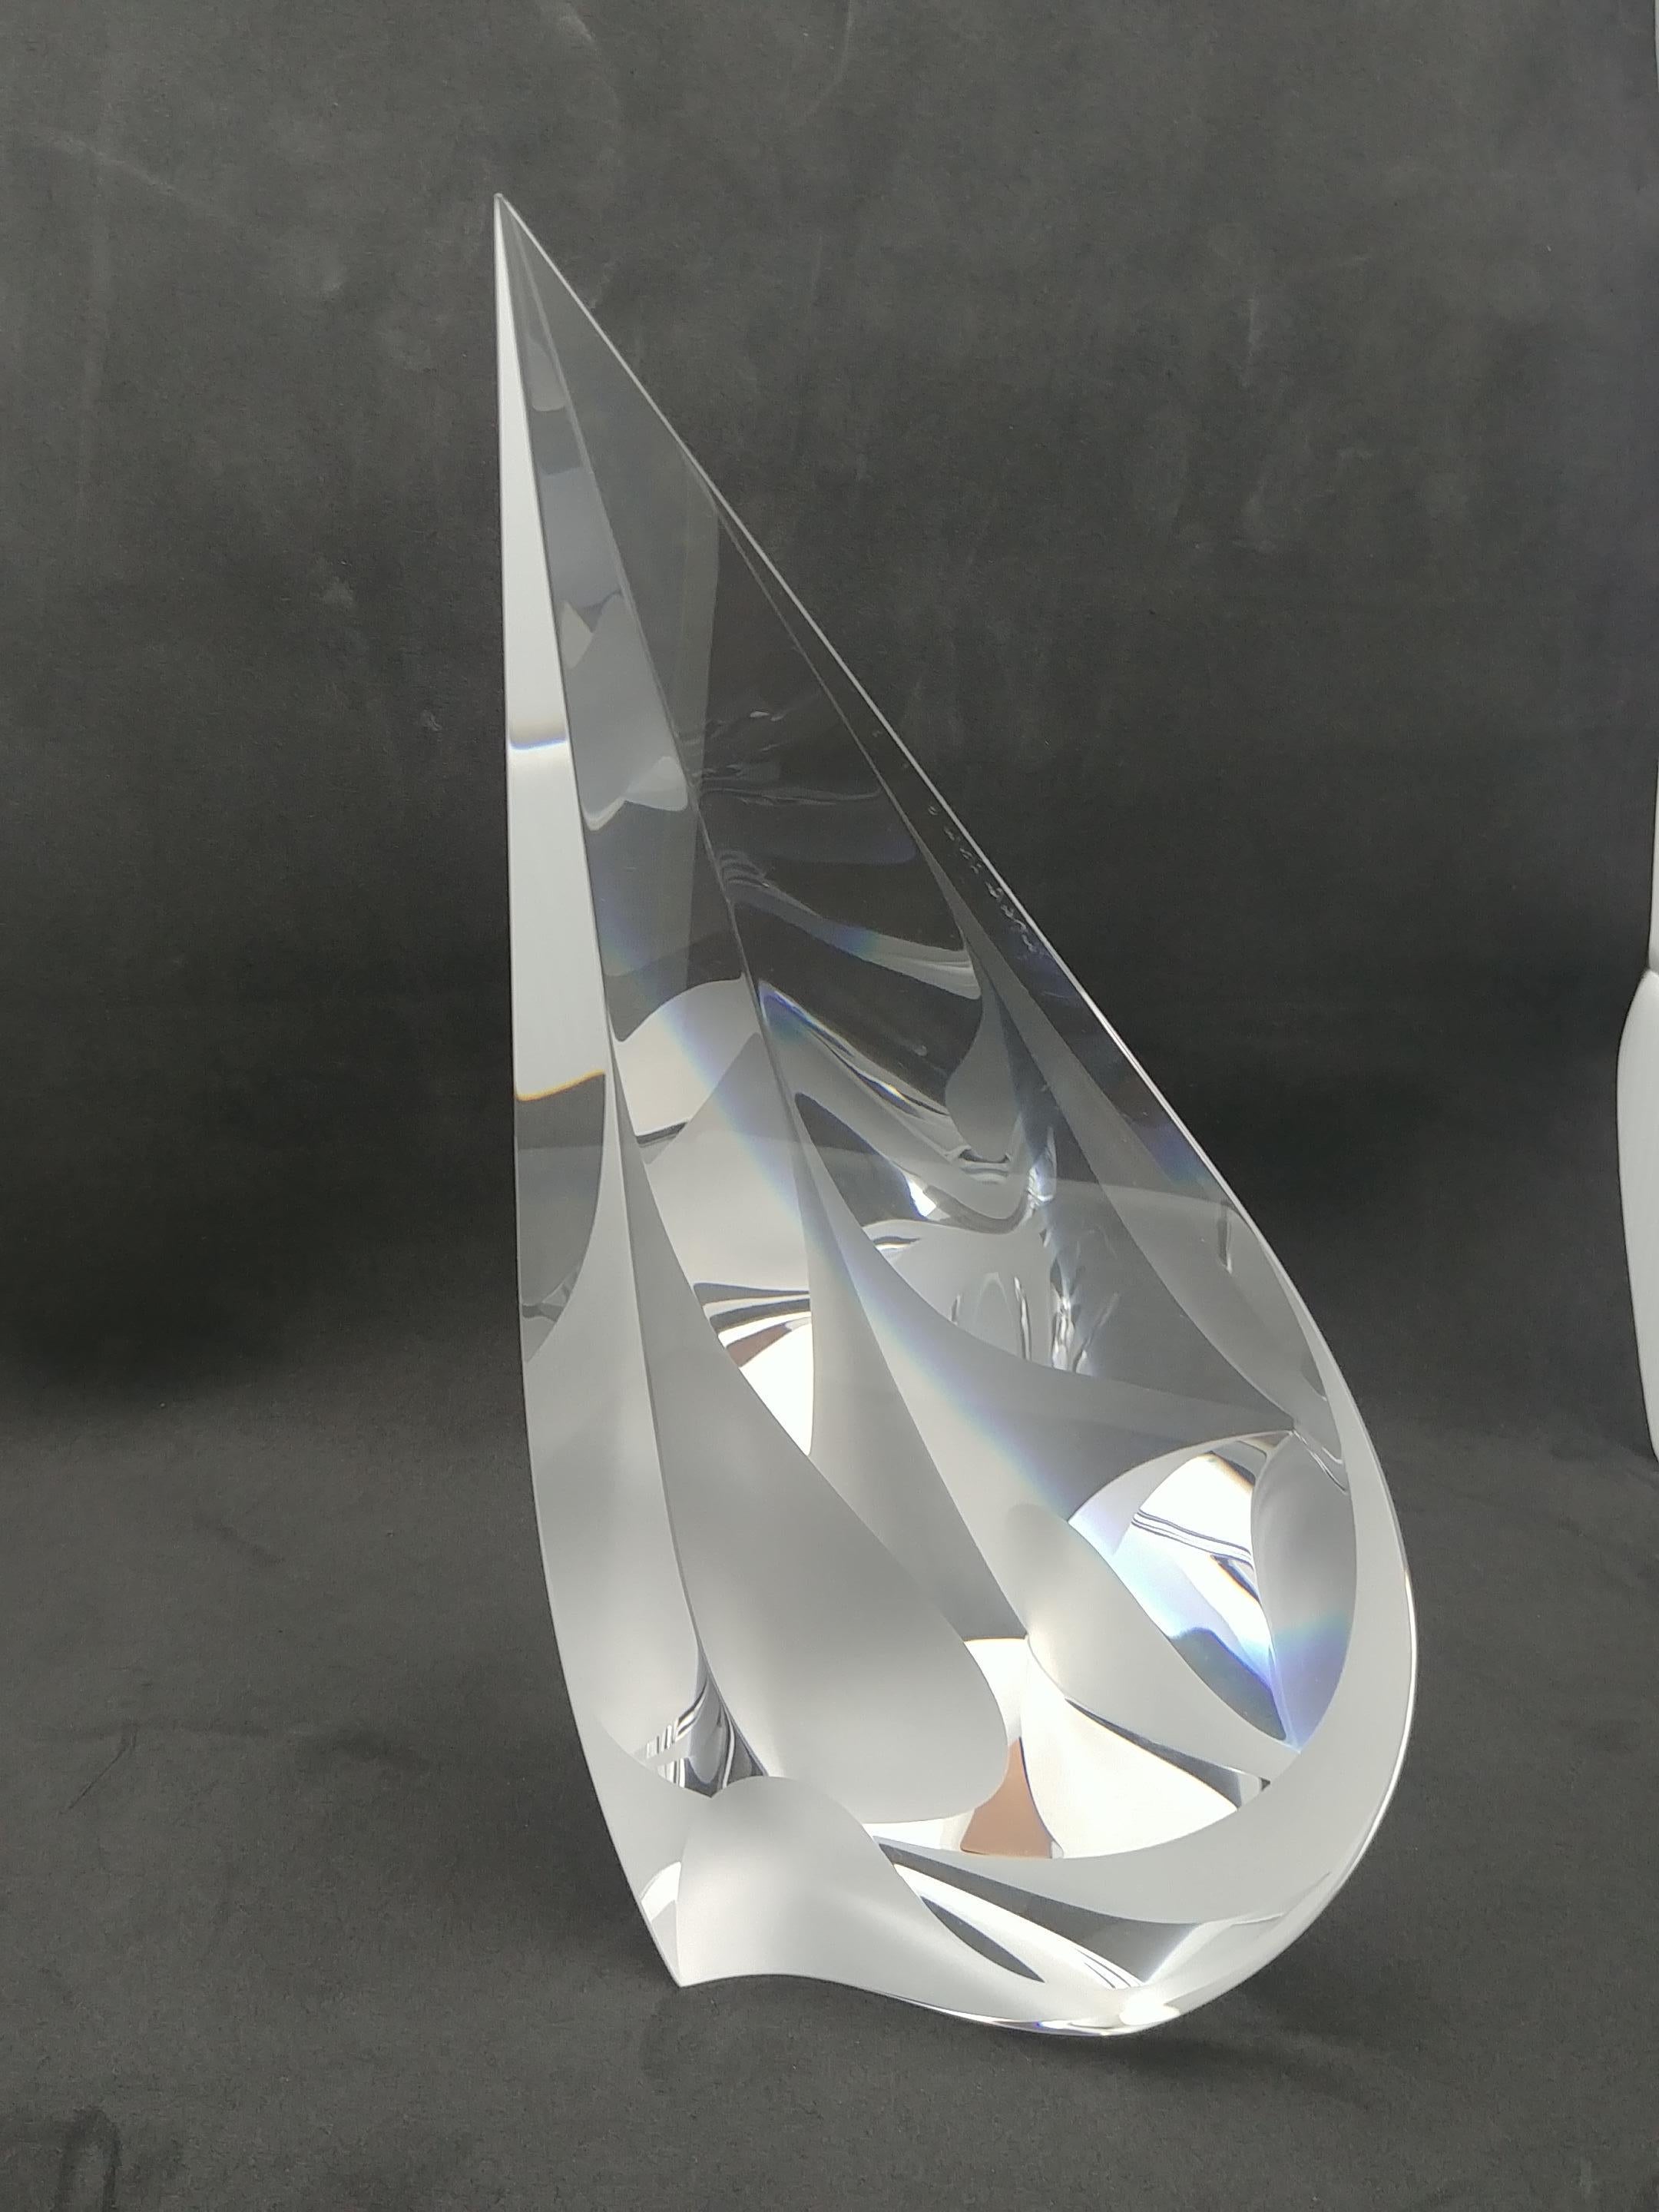 Very nice sculpture in polished/ cut glass, by the well American artist, Christopher Ries. Signed and dated 2000, at edge as shown.